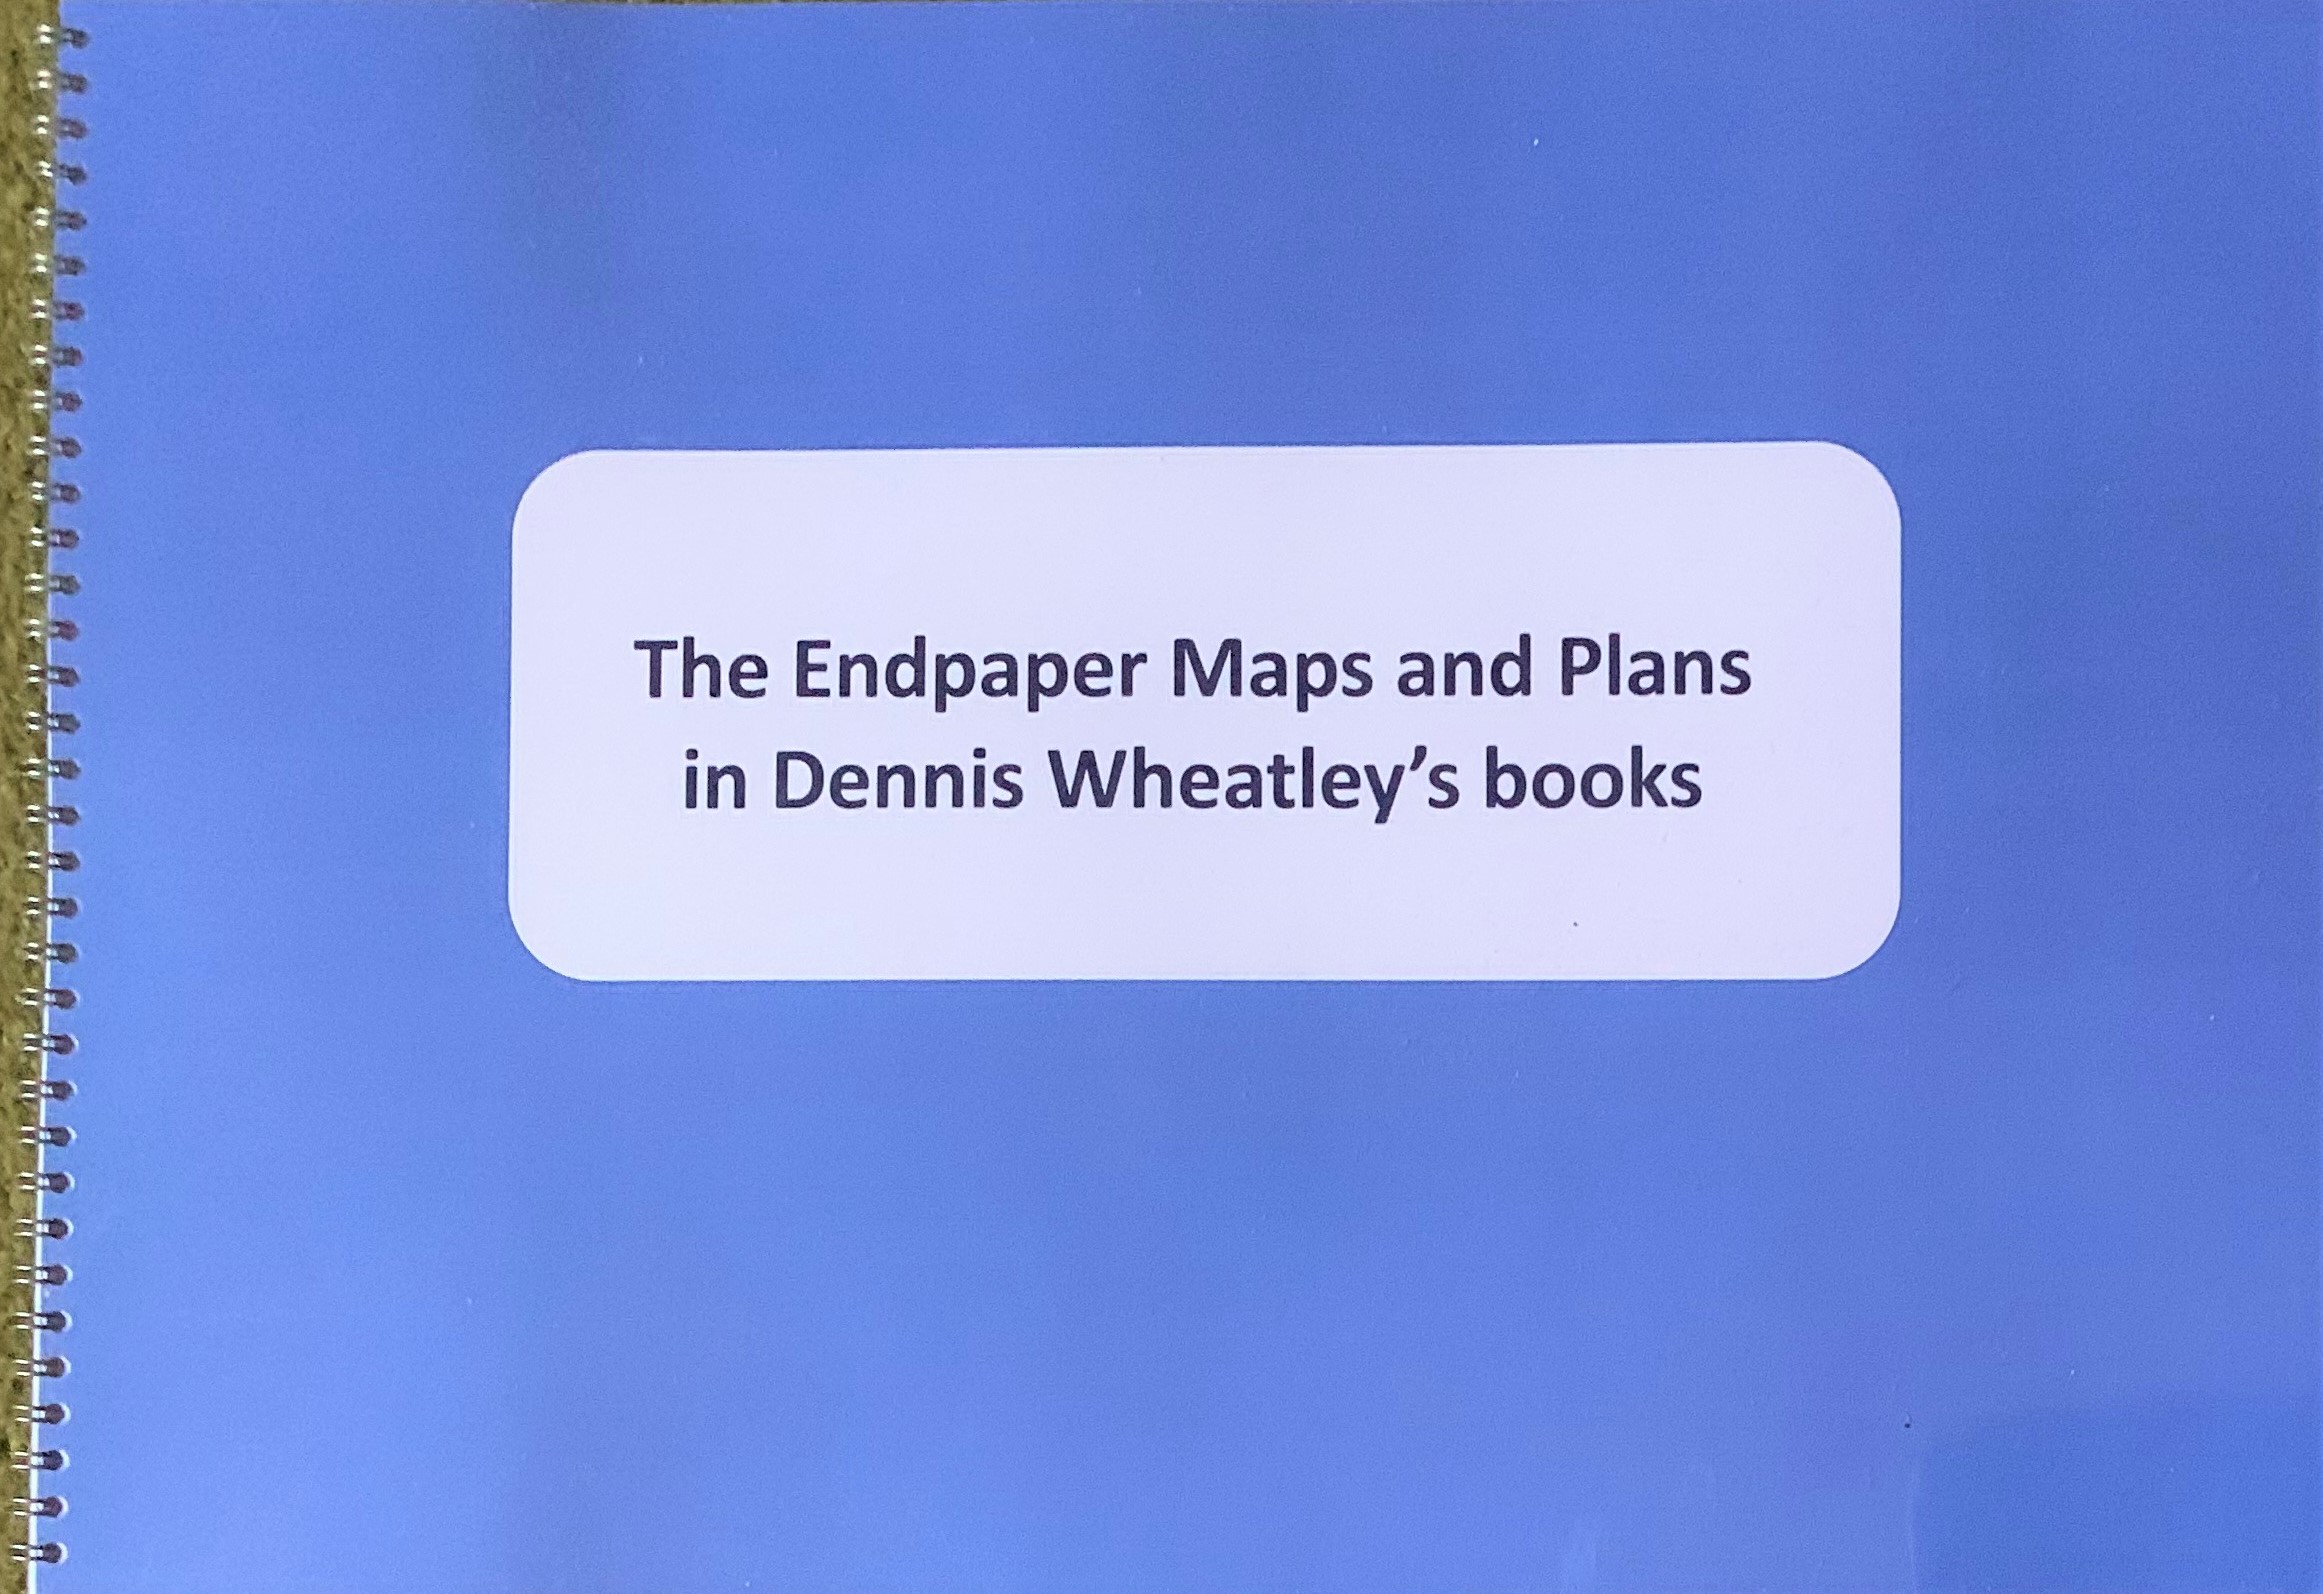 The endpapers, maps and plans in DW’s books